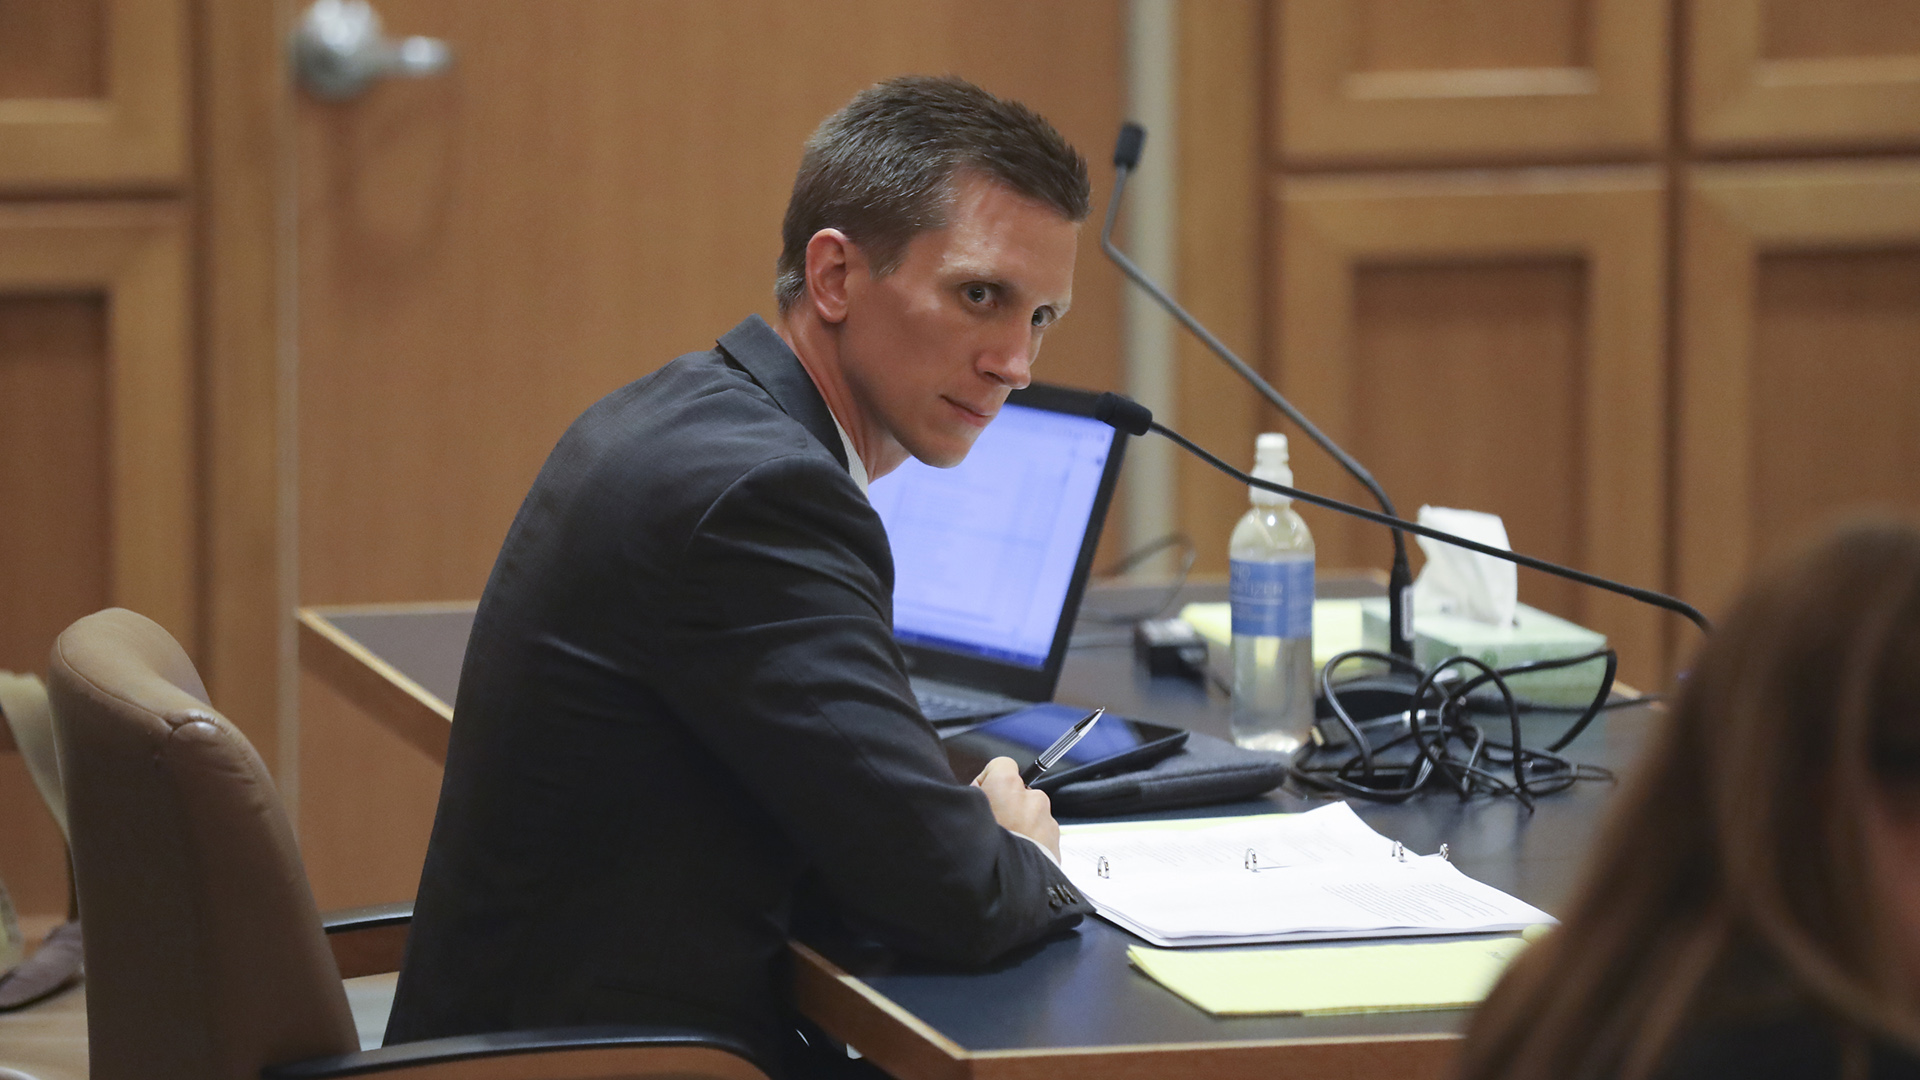 Luke Berg looks to the right while sitting at a courtroom counsel table with a three-ring binder, laptop computer, microphones, bottle of water, tissue box and other items on its surface.